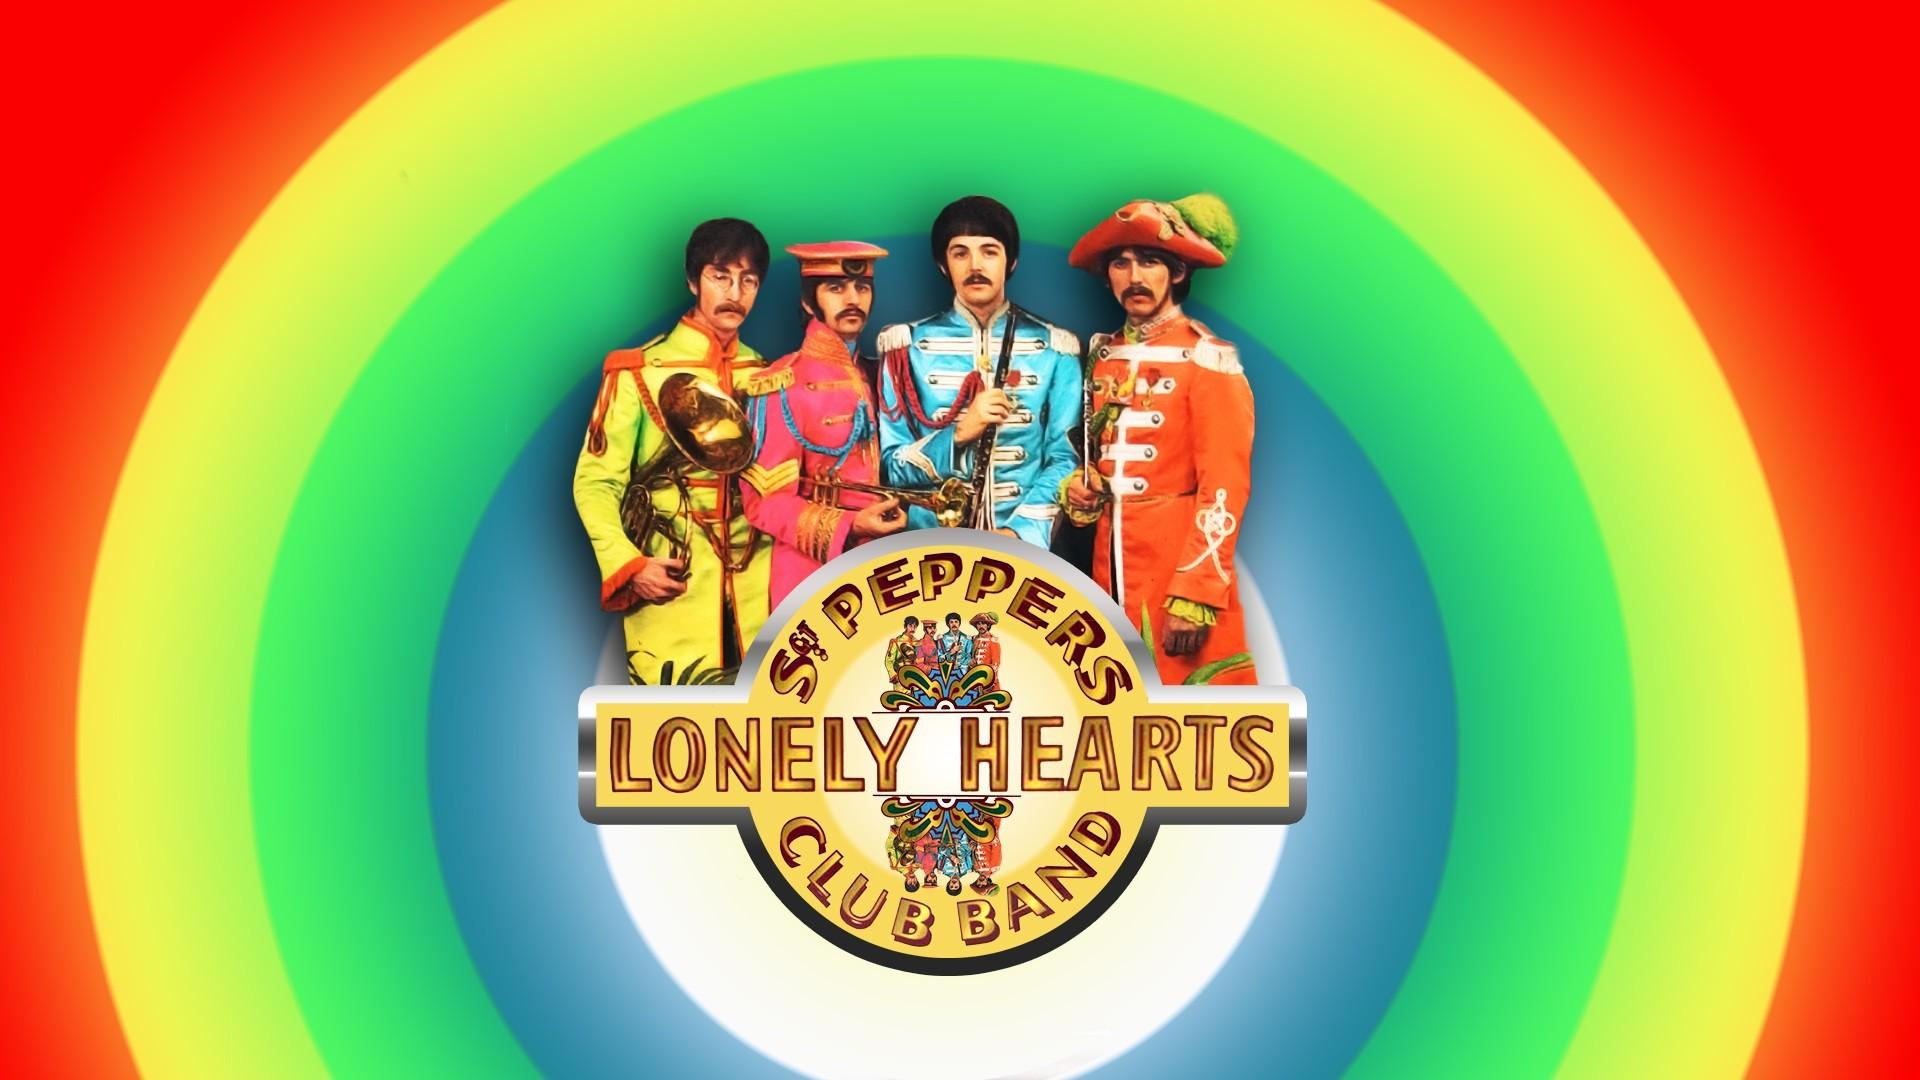 Peppers Lonely Hearts Club Band The Beatles Wallpaper 135936